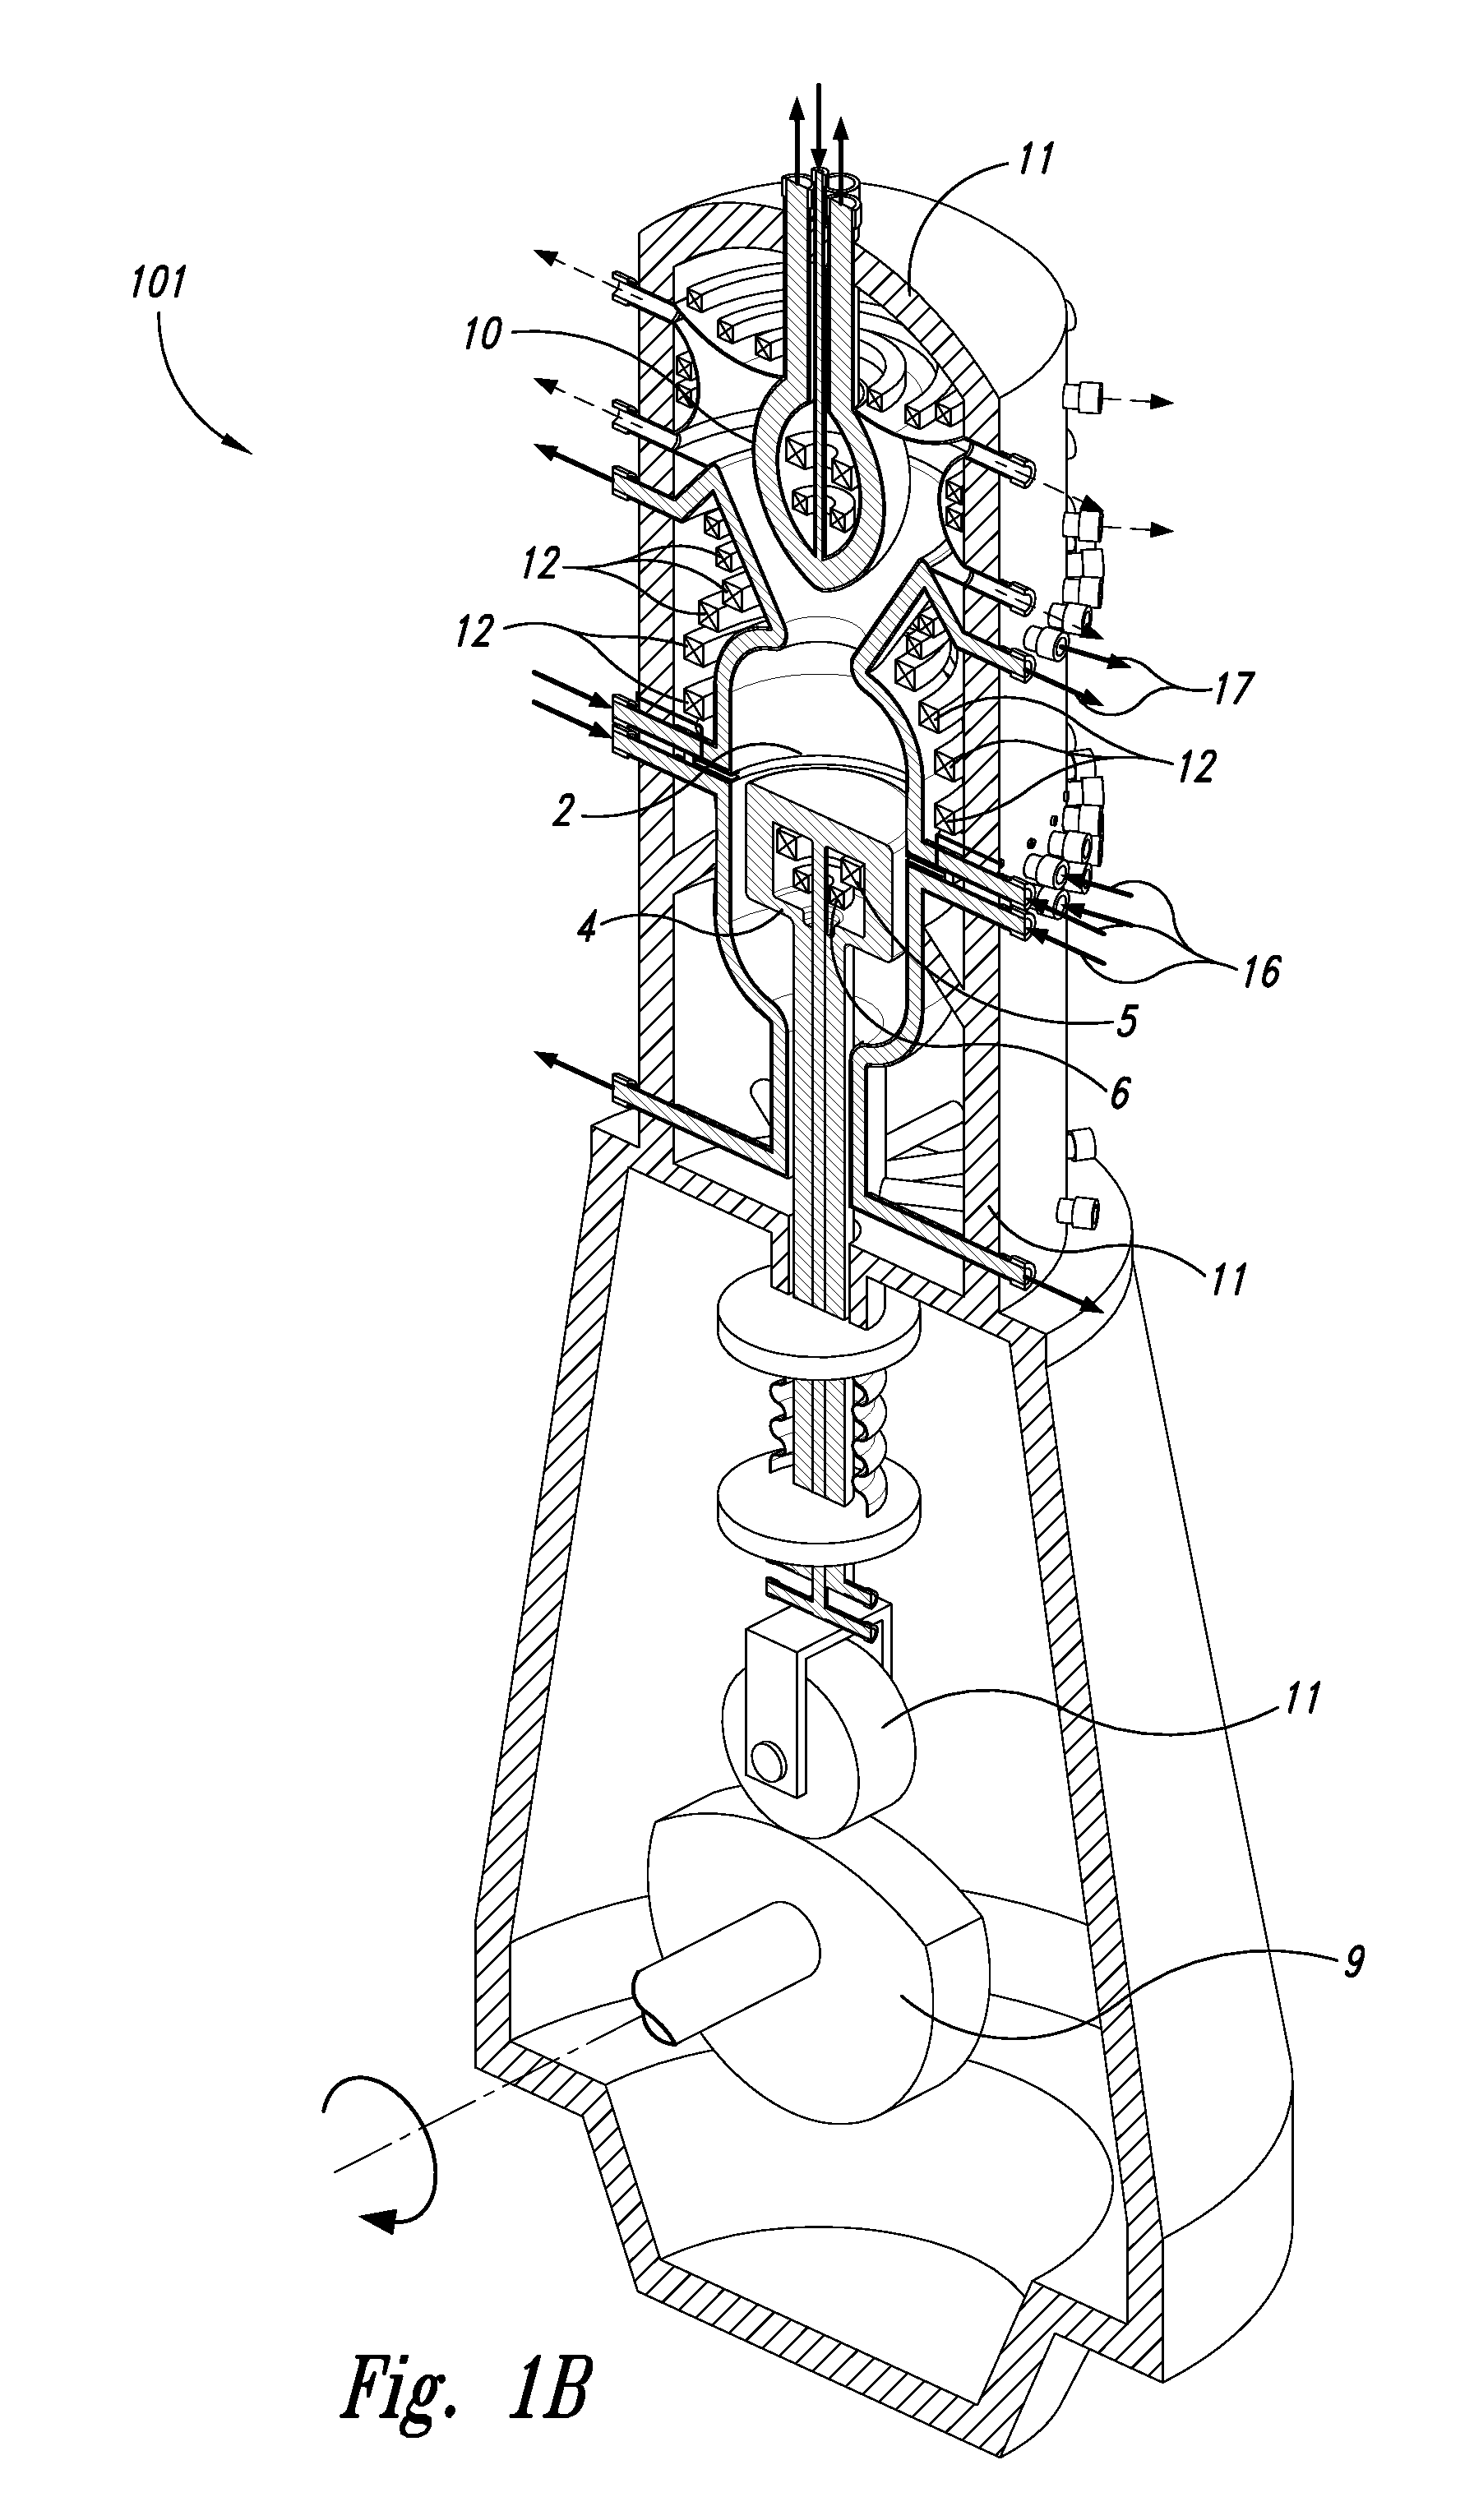 Device for compressing a compact toroidal plasma for use as a neutron source and fusion reactor